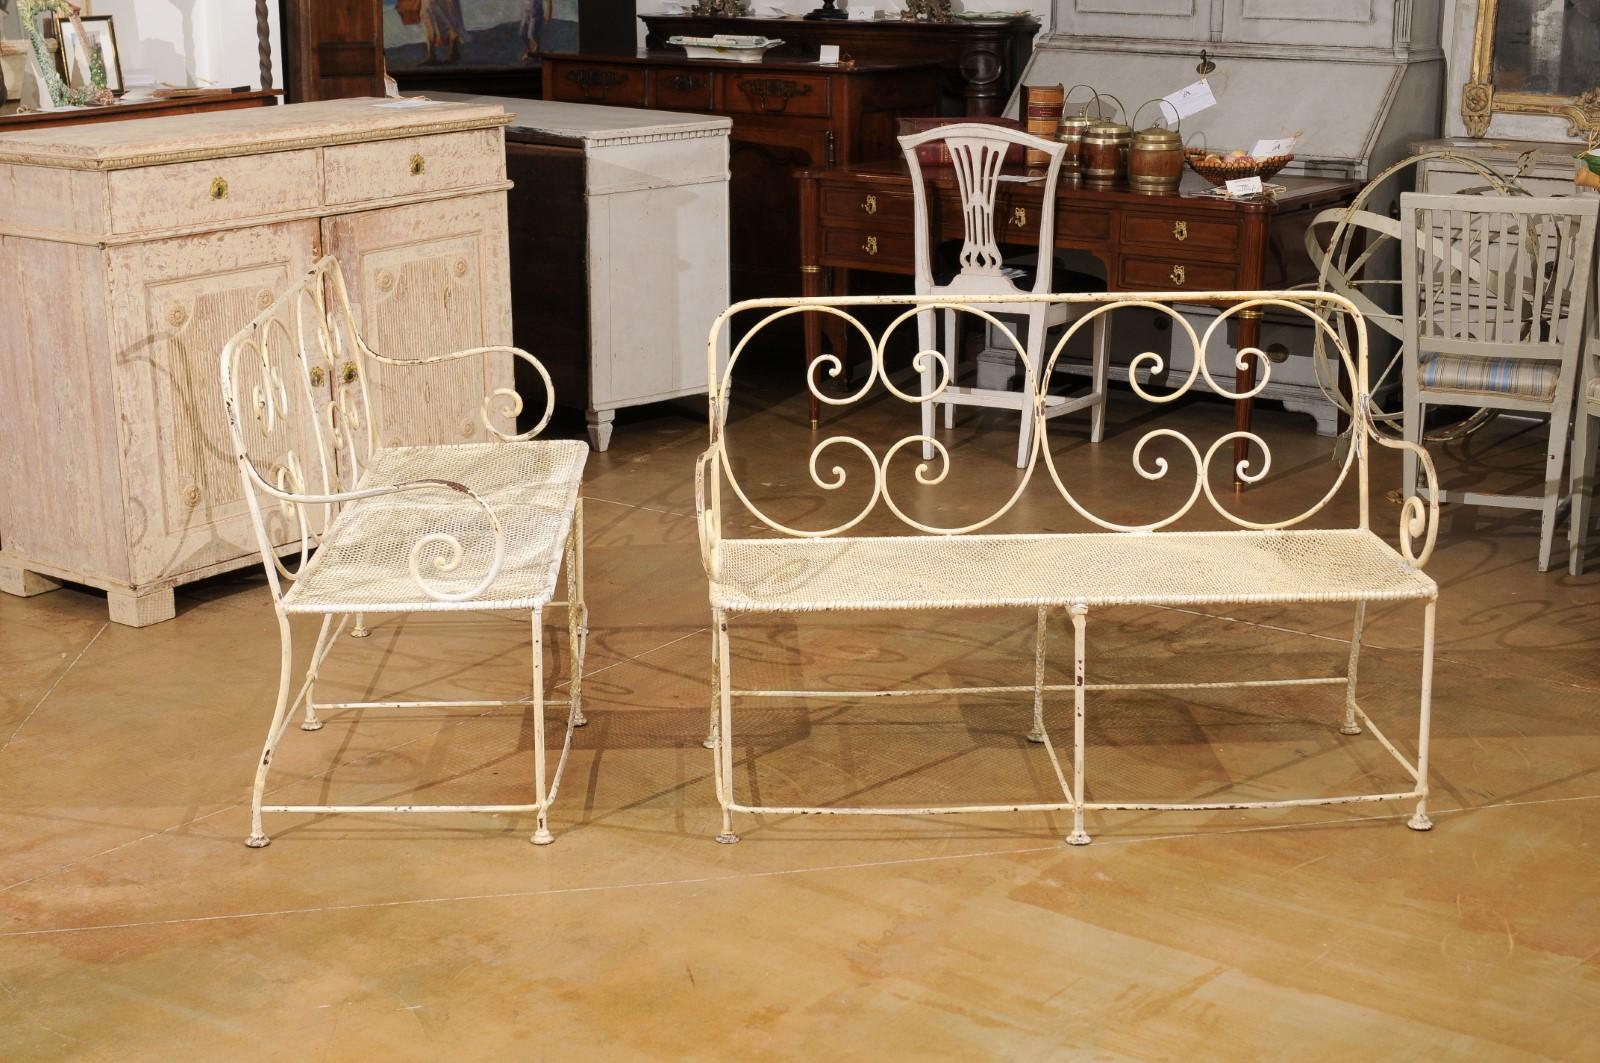 19th Century French 1850s Napoléon III Period Painted Iron Benches with C-Scrolls, Sold Each